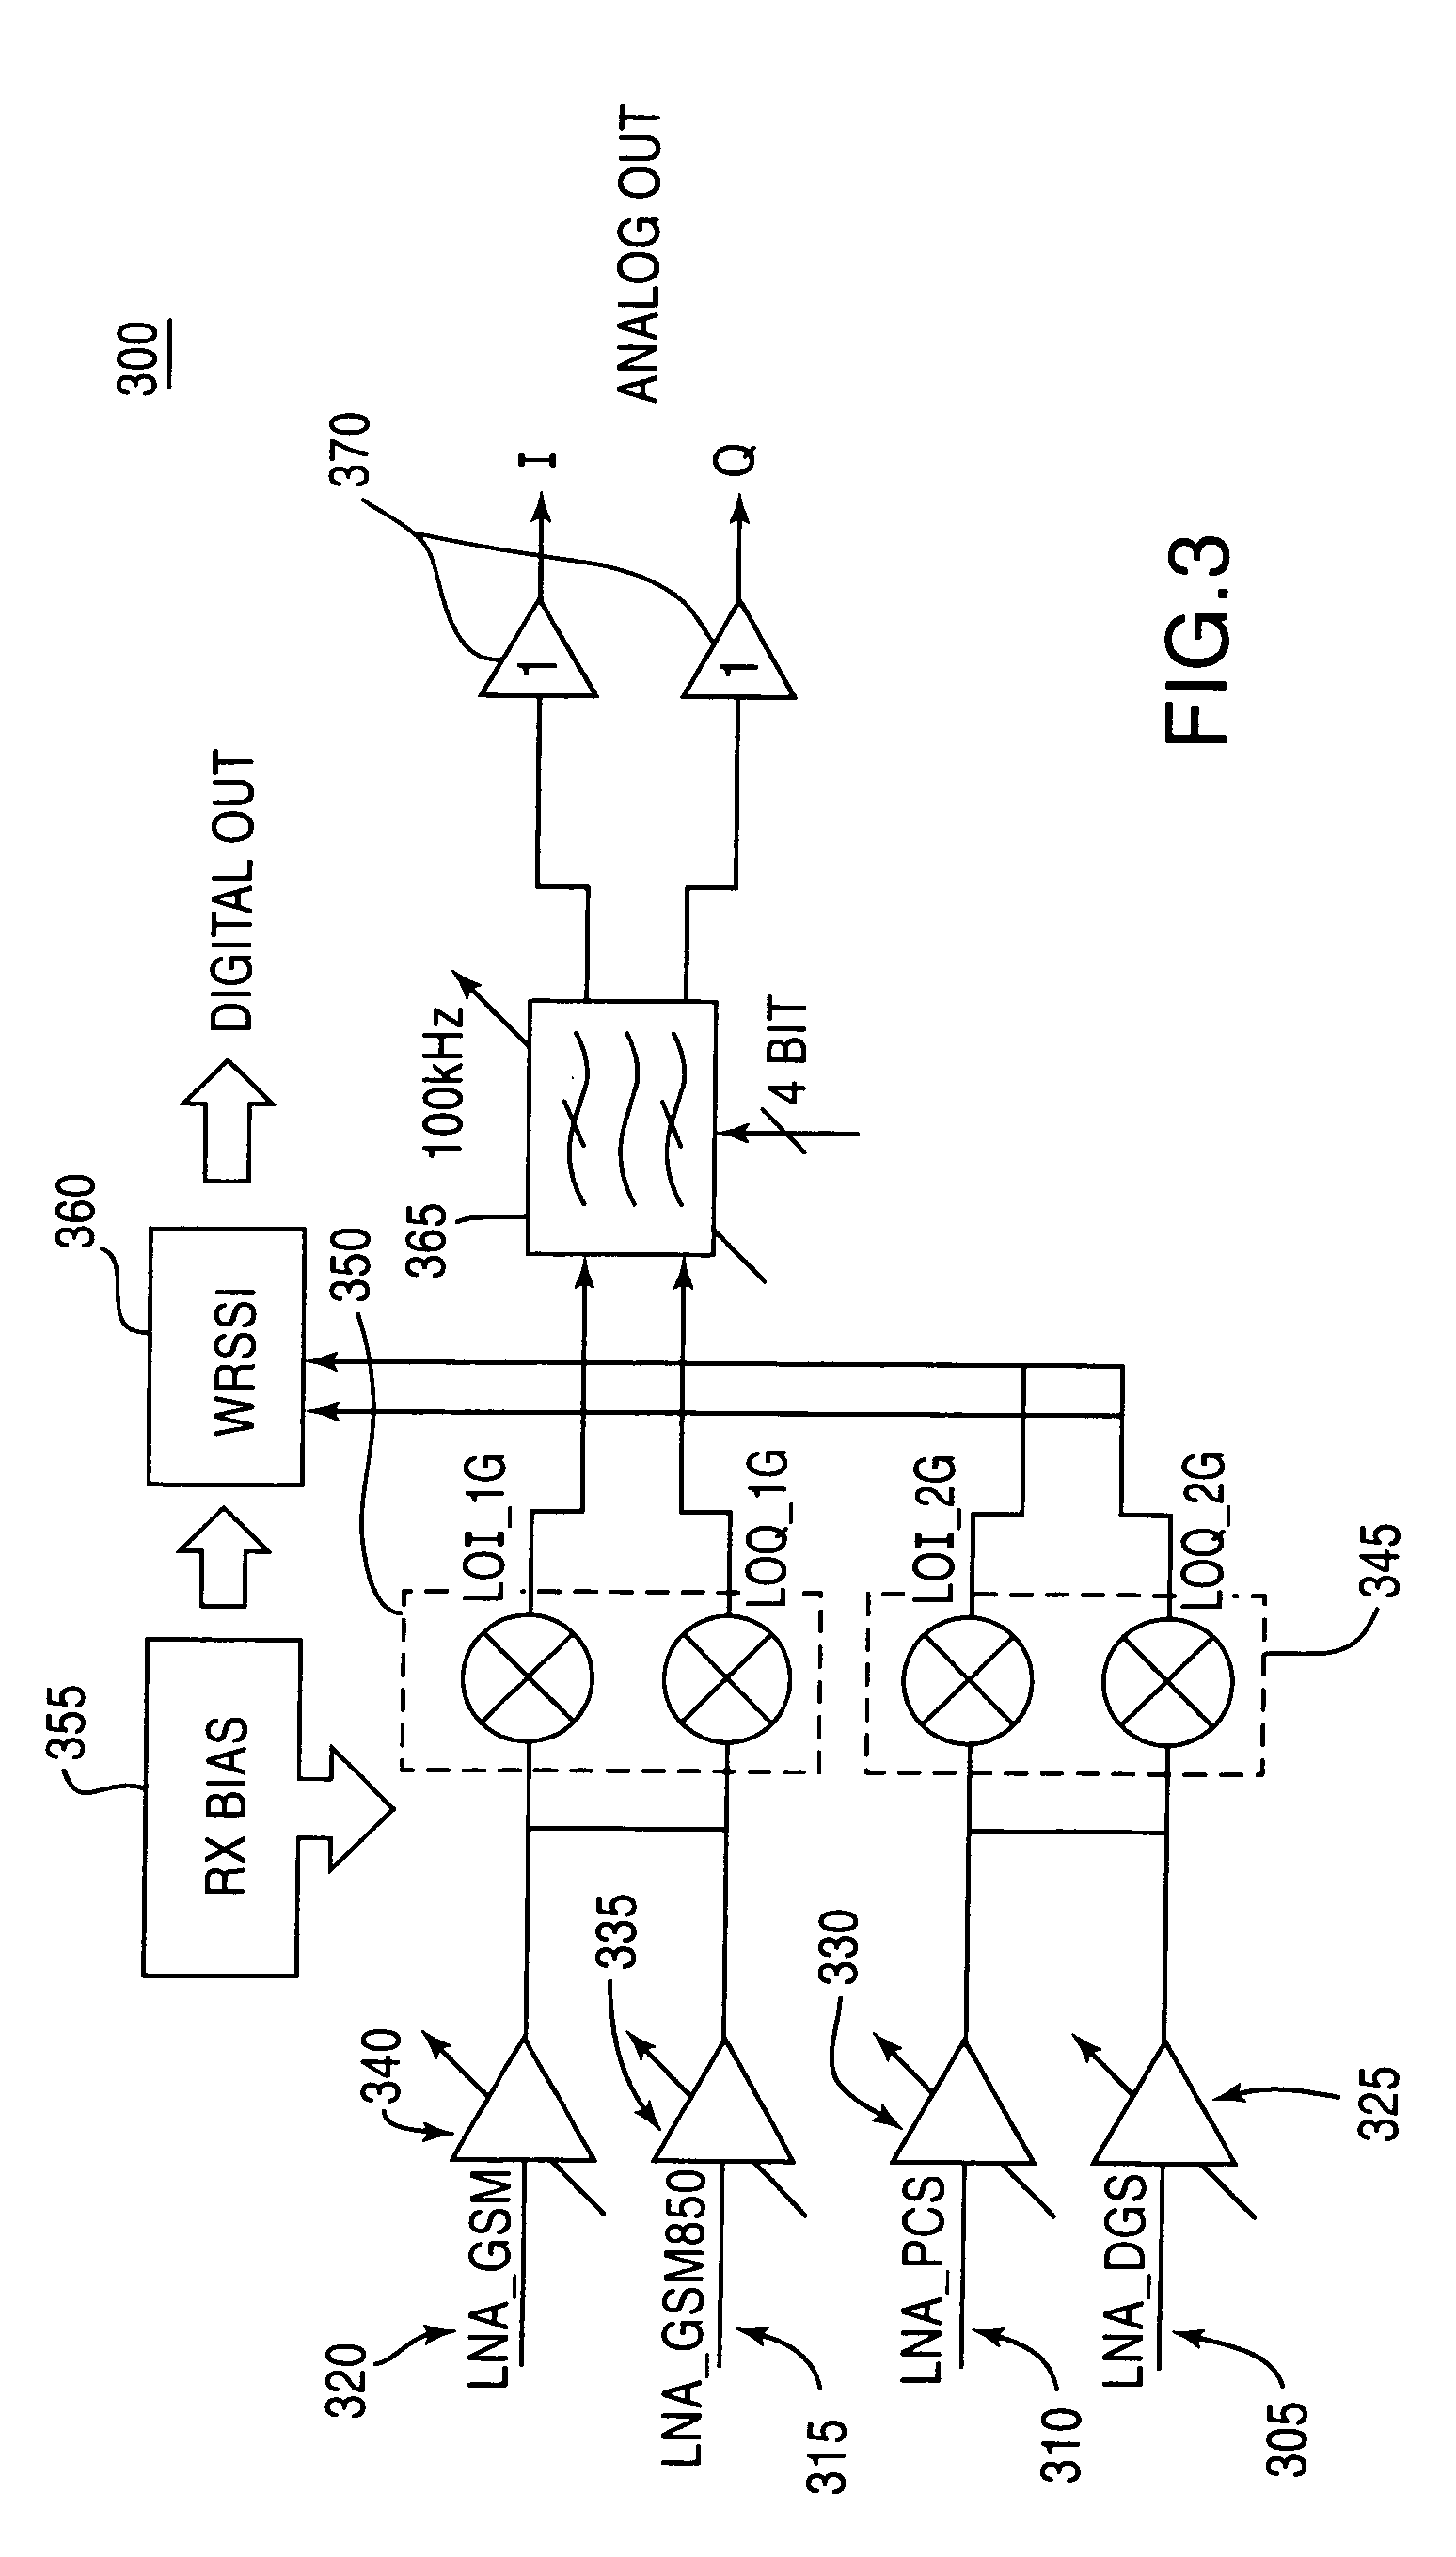 CMOS-based receiver for communications applications